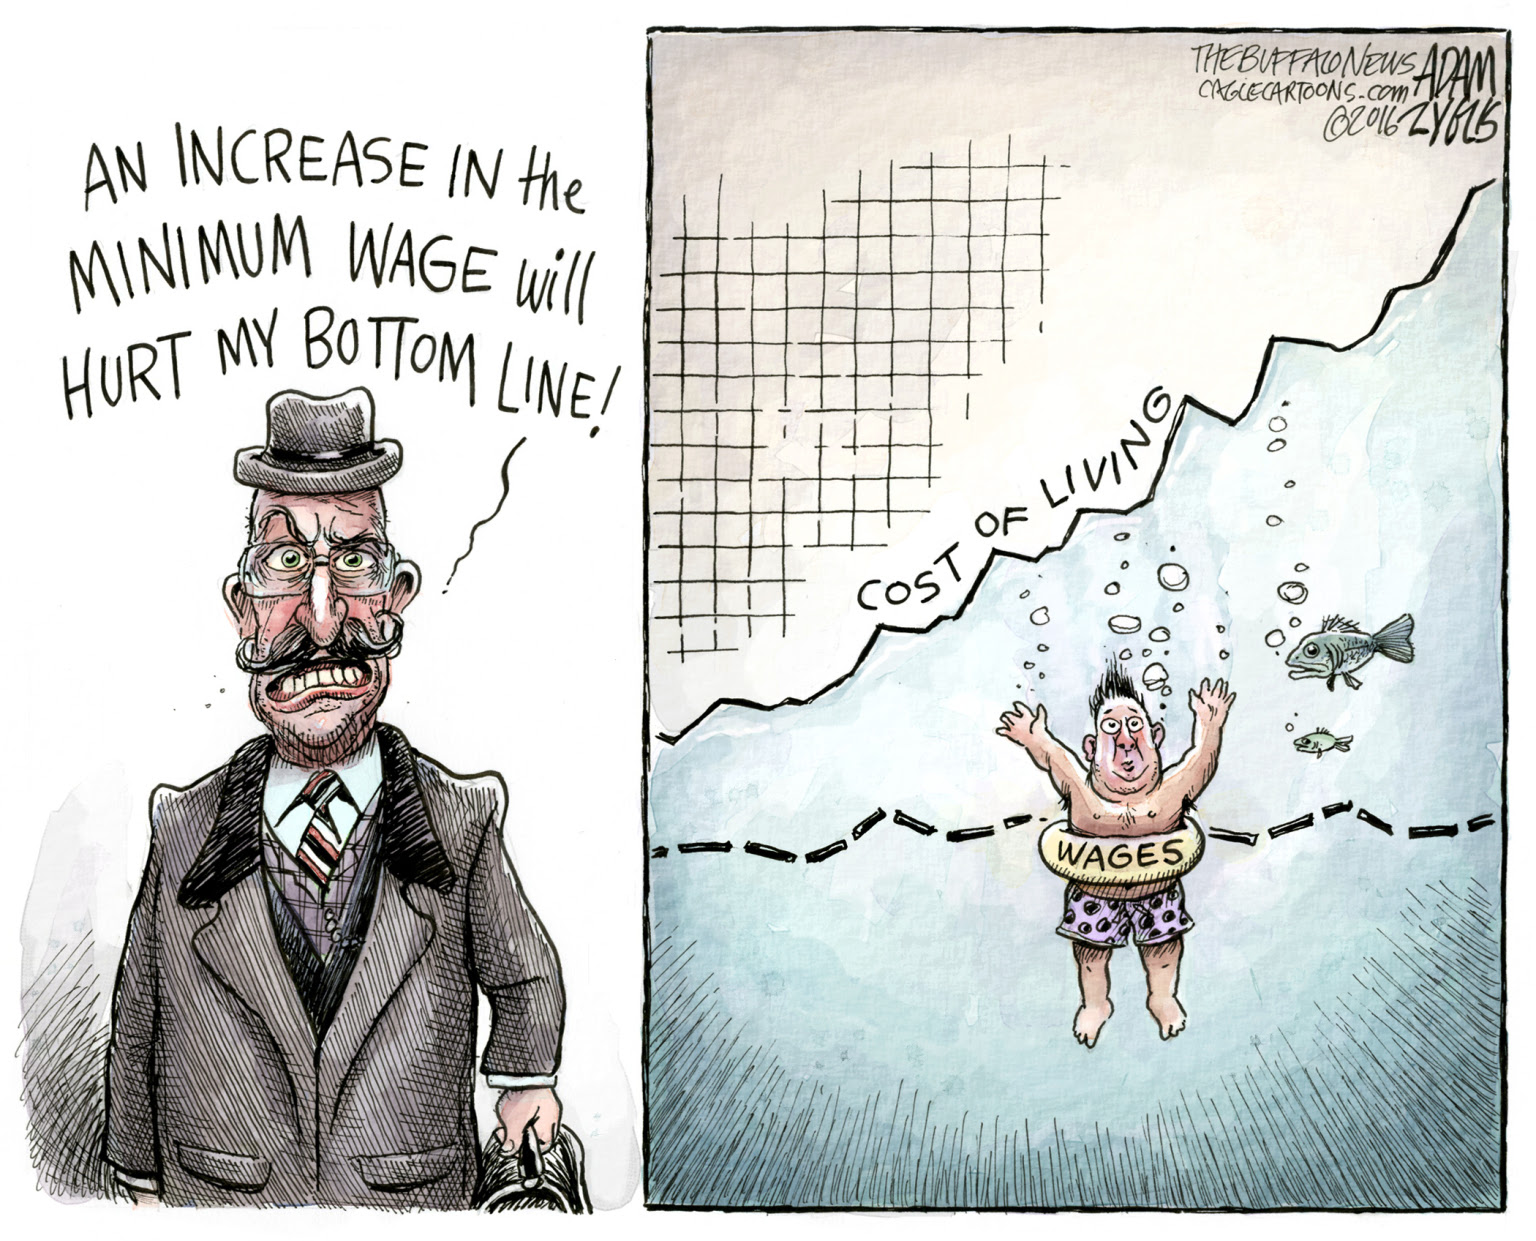 Republicans oppose a living wage for their workers